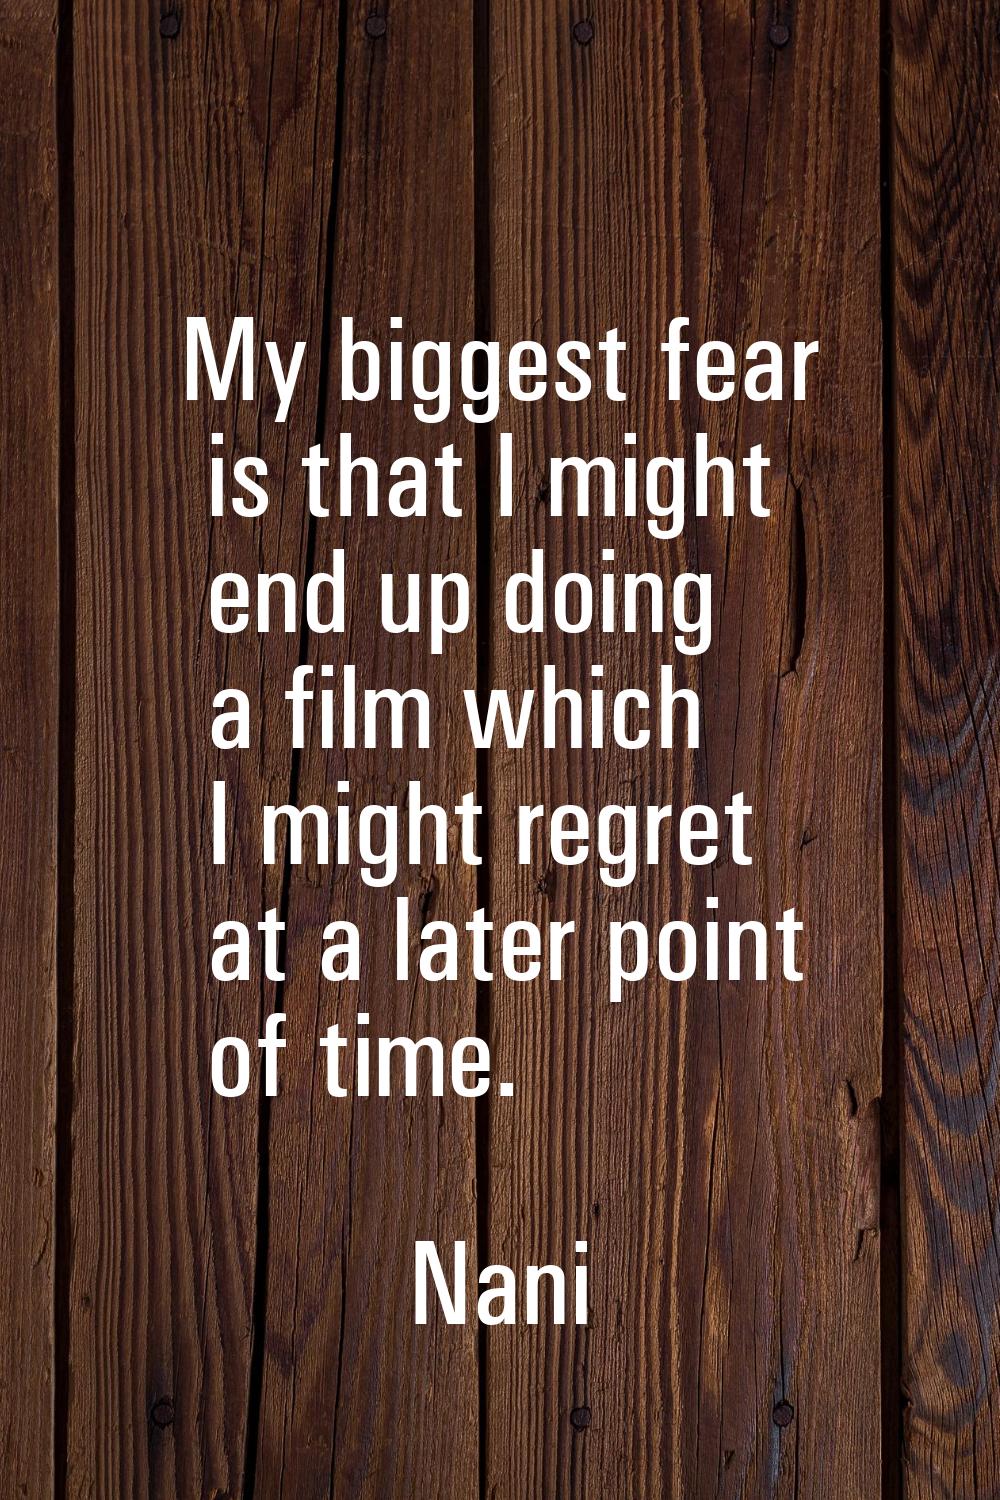 My biggest fear is that I might end up doing a film which I might regret at a later point of time.